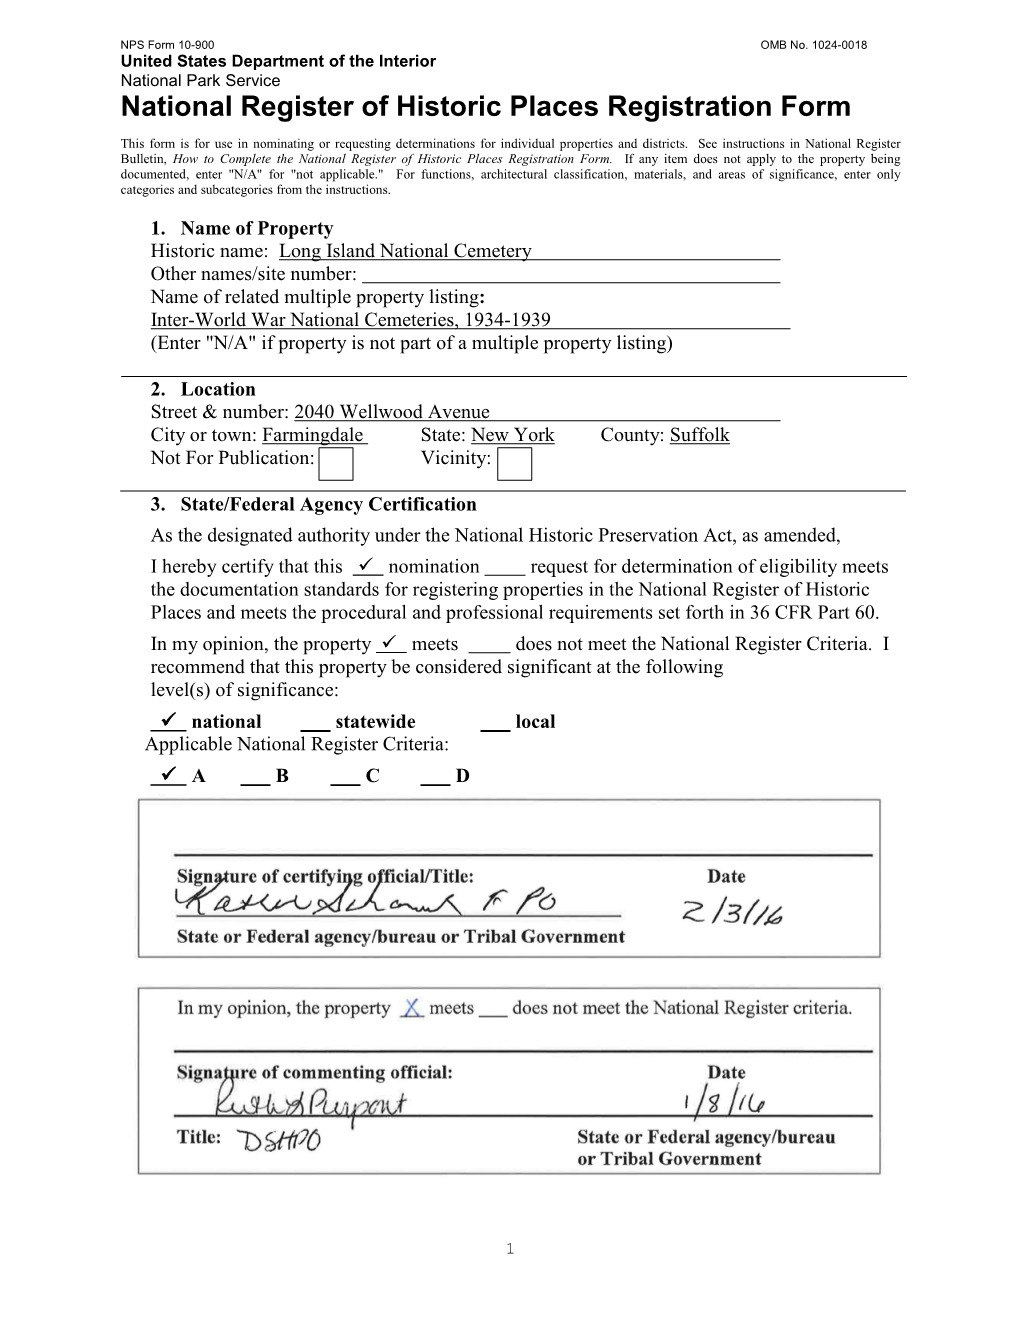 Long Island National Cemetery HRHP Registration Form